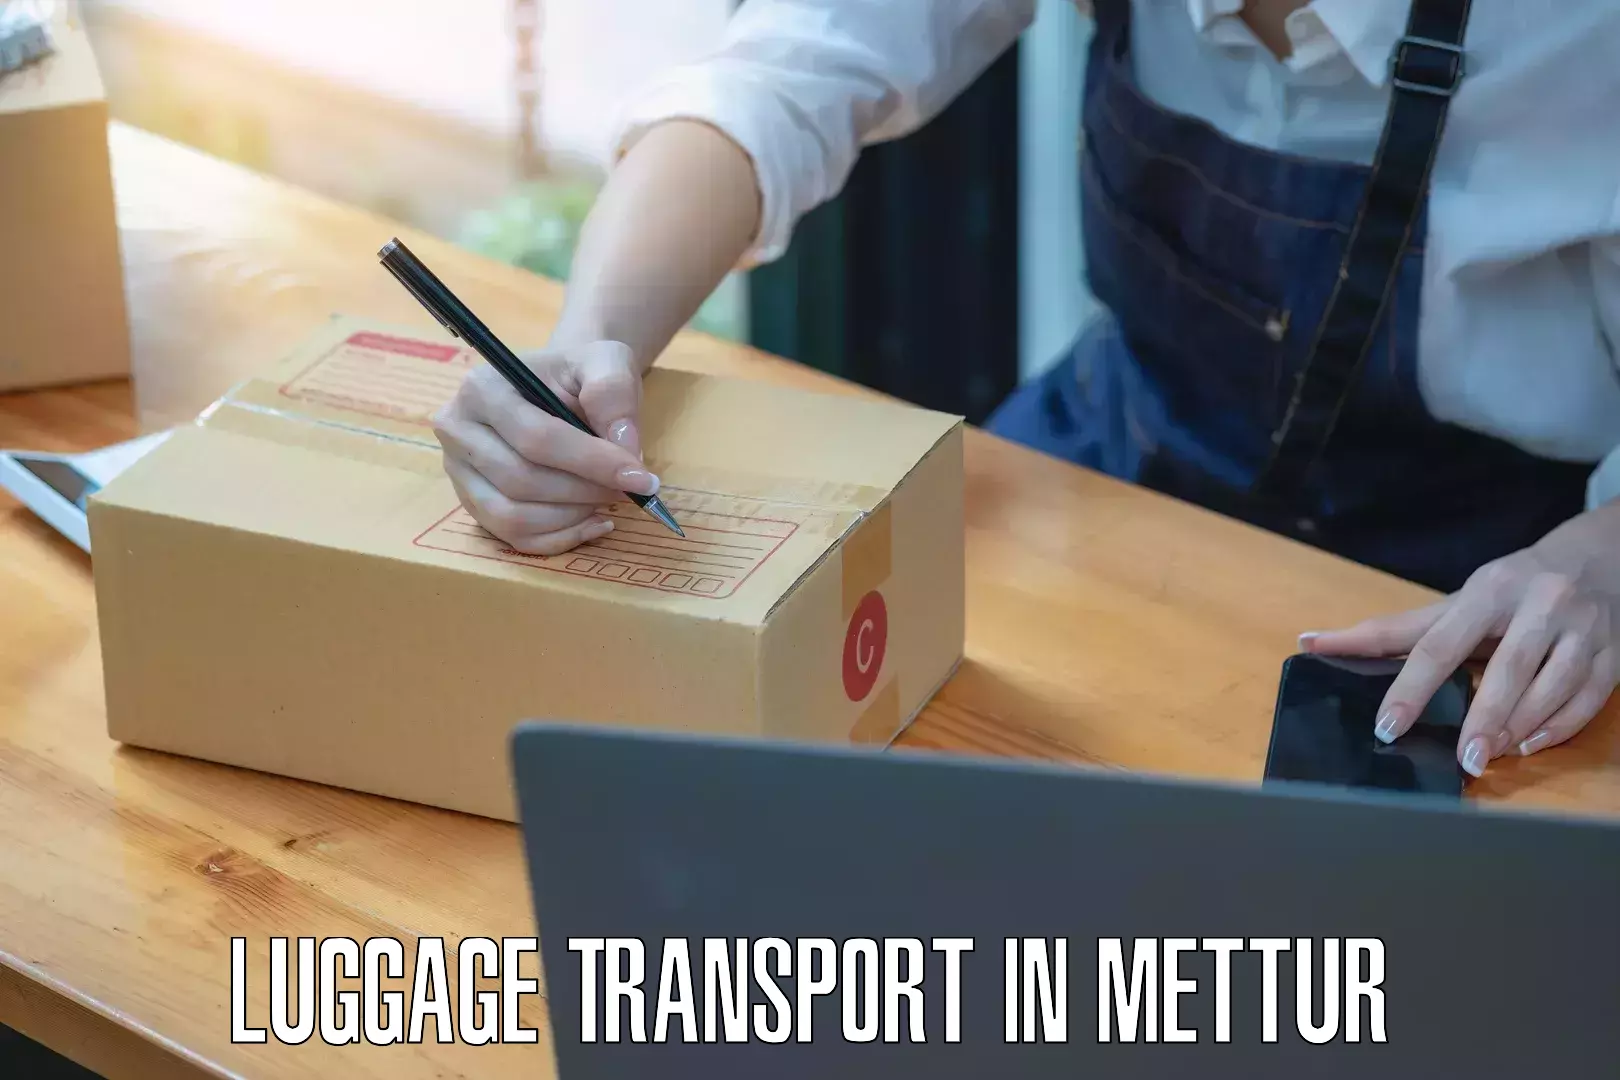 Luggage shipping consultation in Mettur